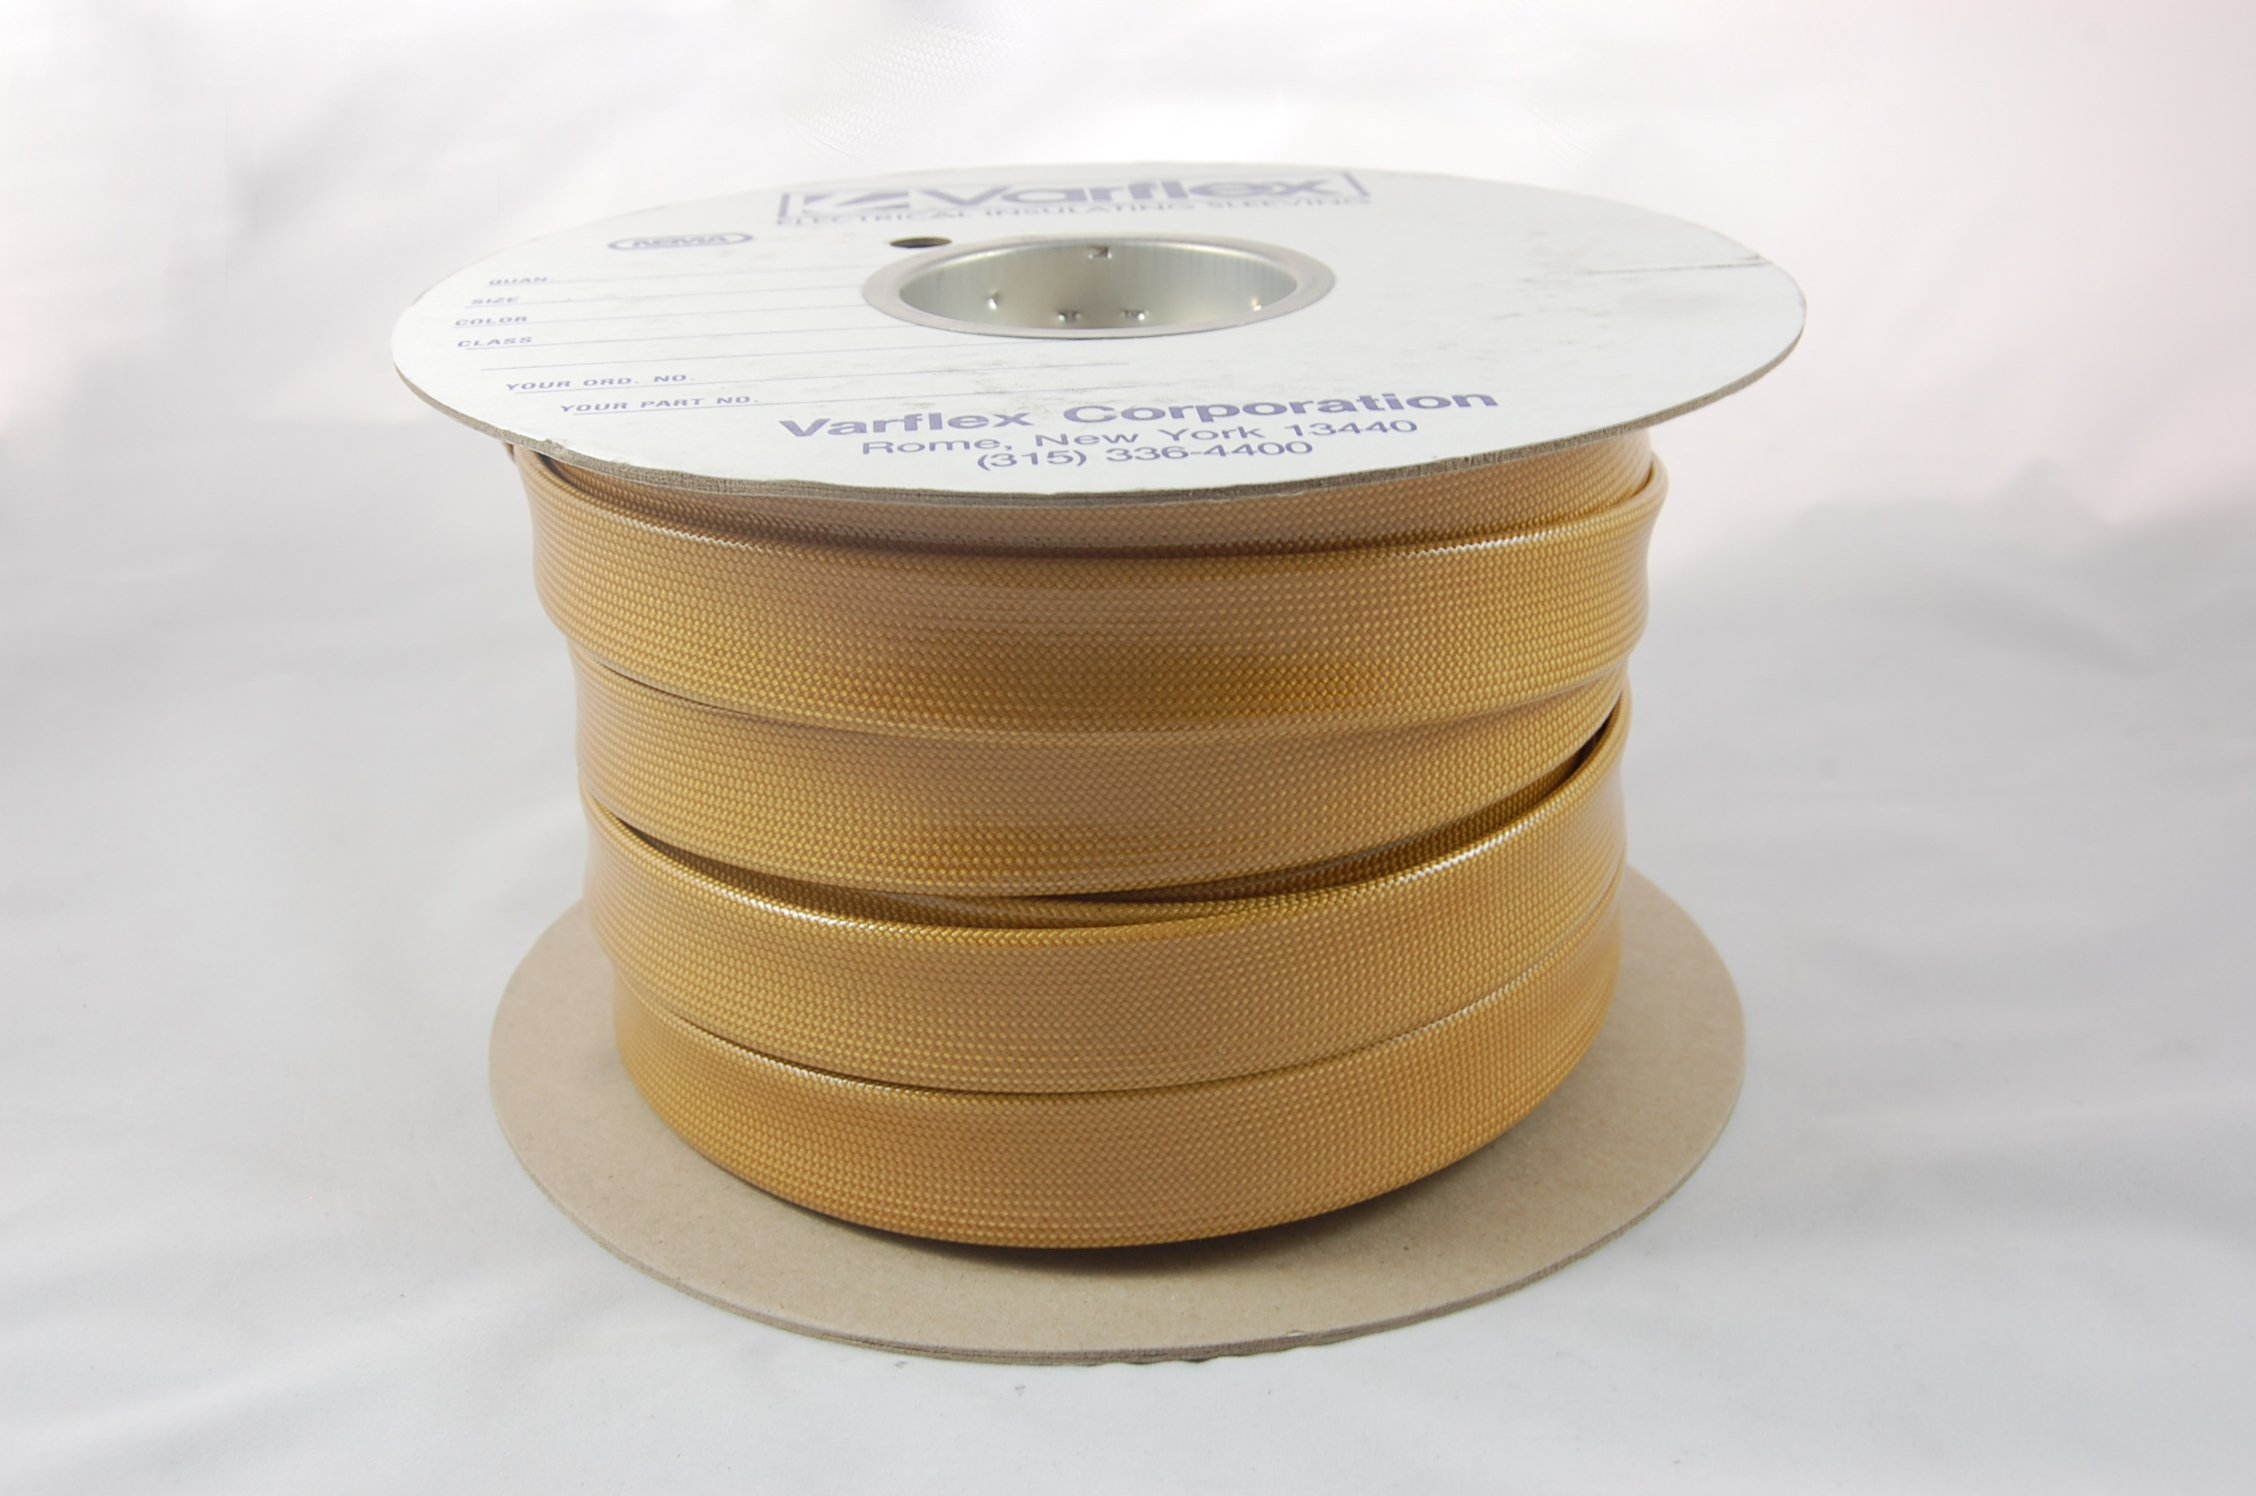 #15 AWG Varglas Silicone Resin 500 Grade H-C-1 (2500V) High Temperature Silicone Resin Coated Braided Fiberglass Sleeving 200°C, natural, 500 FT per spool